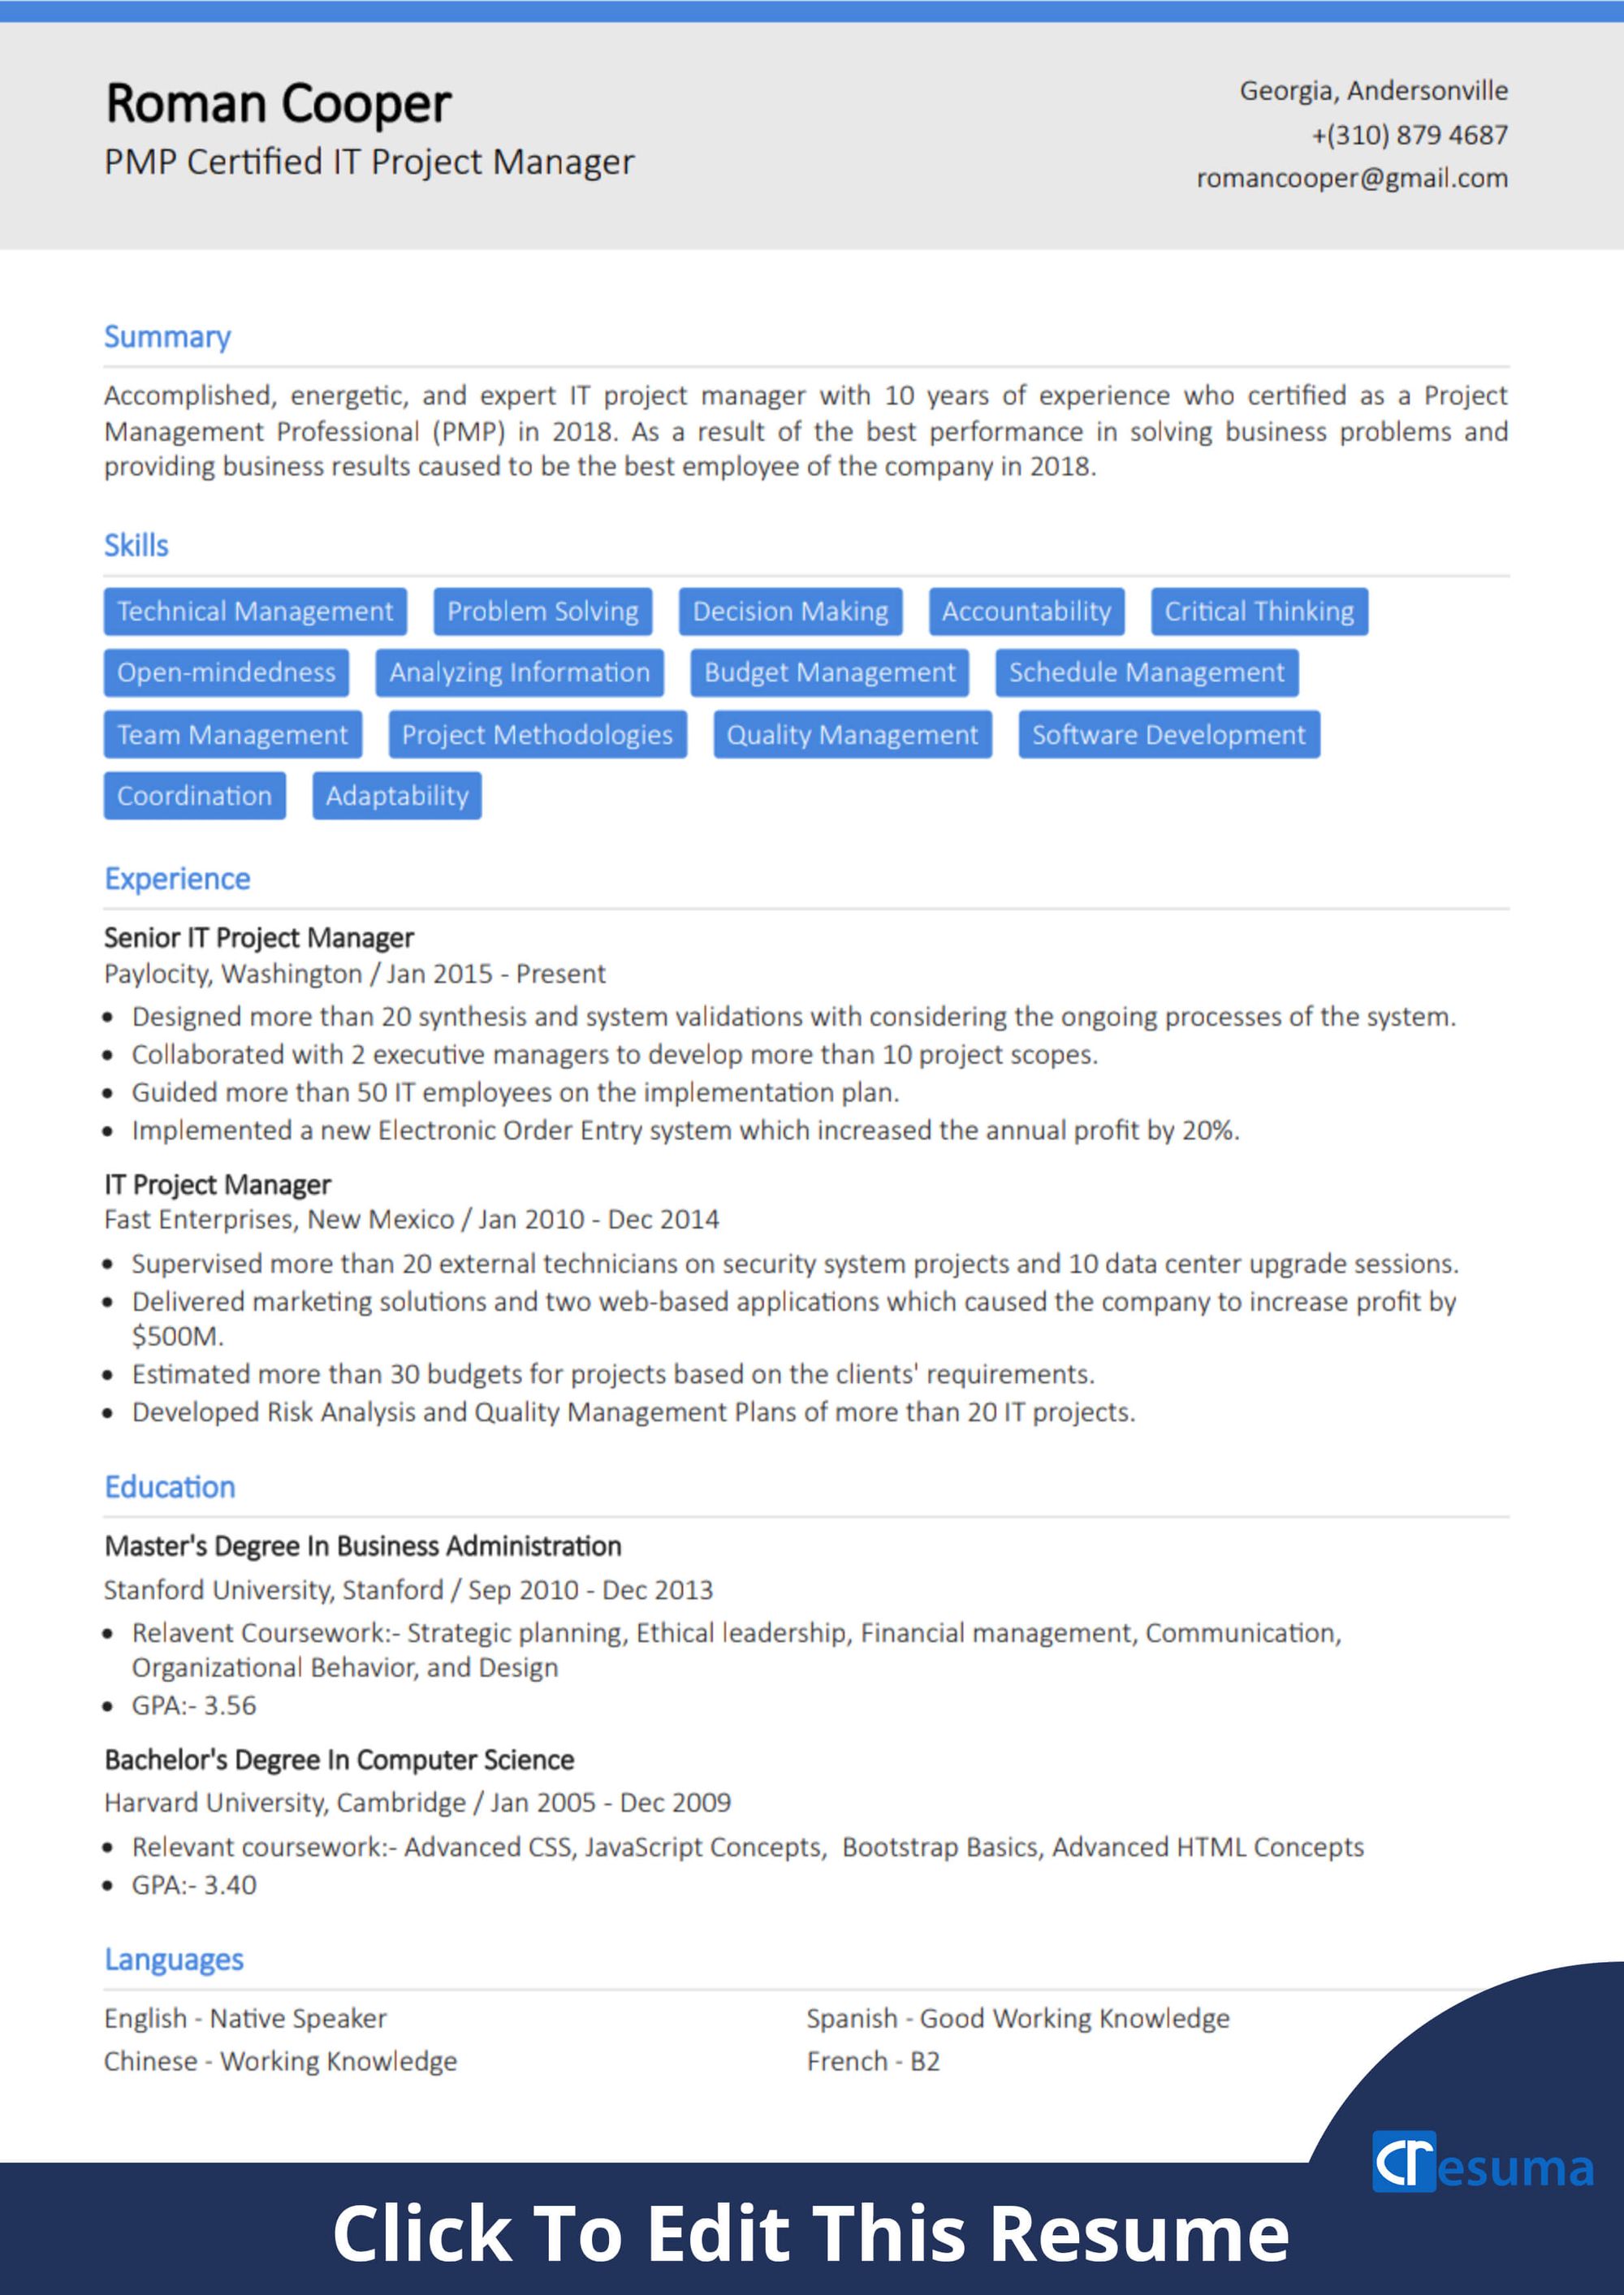 IT Project Manager Resume Example image